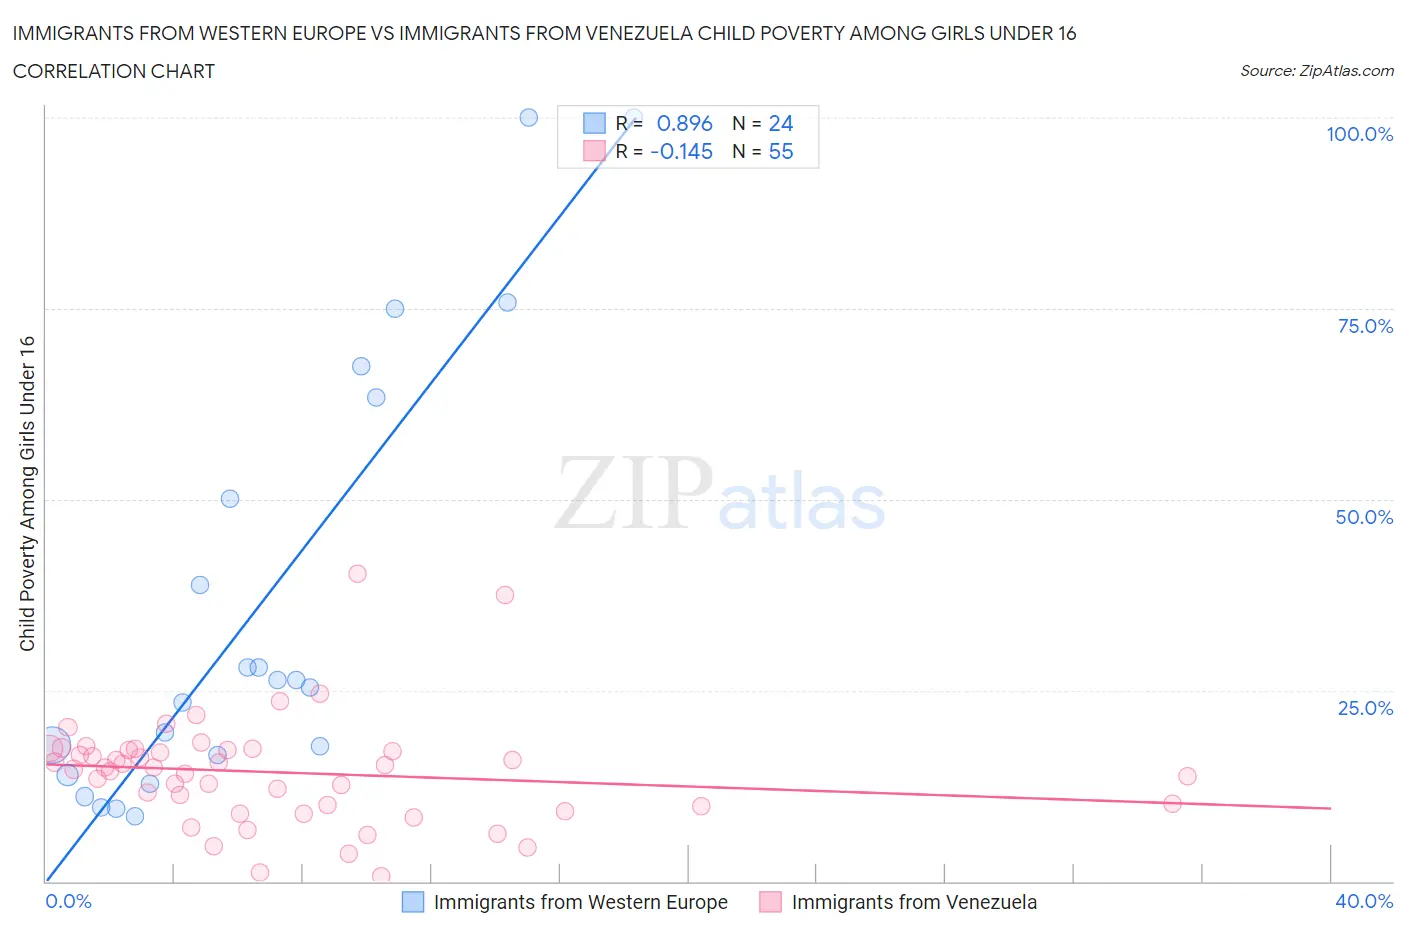 Immigrants from Western Europe vs Immigrants from Venezuela Child Poverty Among Girls Under 16